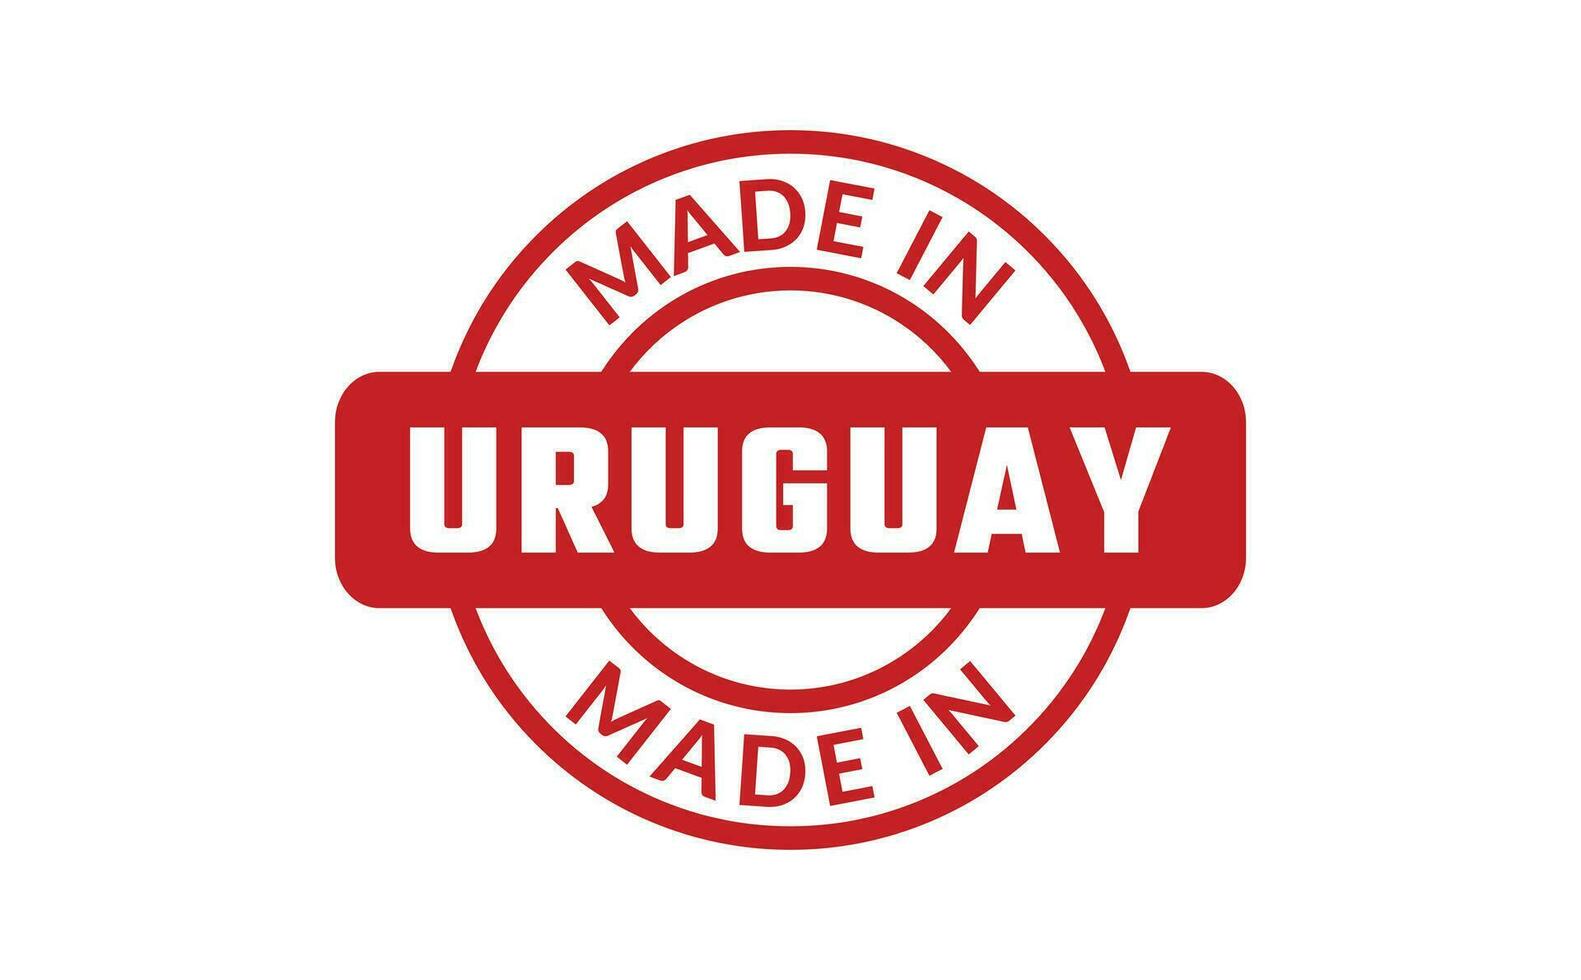 Made In Uruguay Rubber Stamp vector